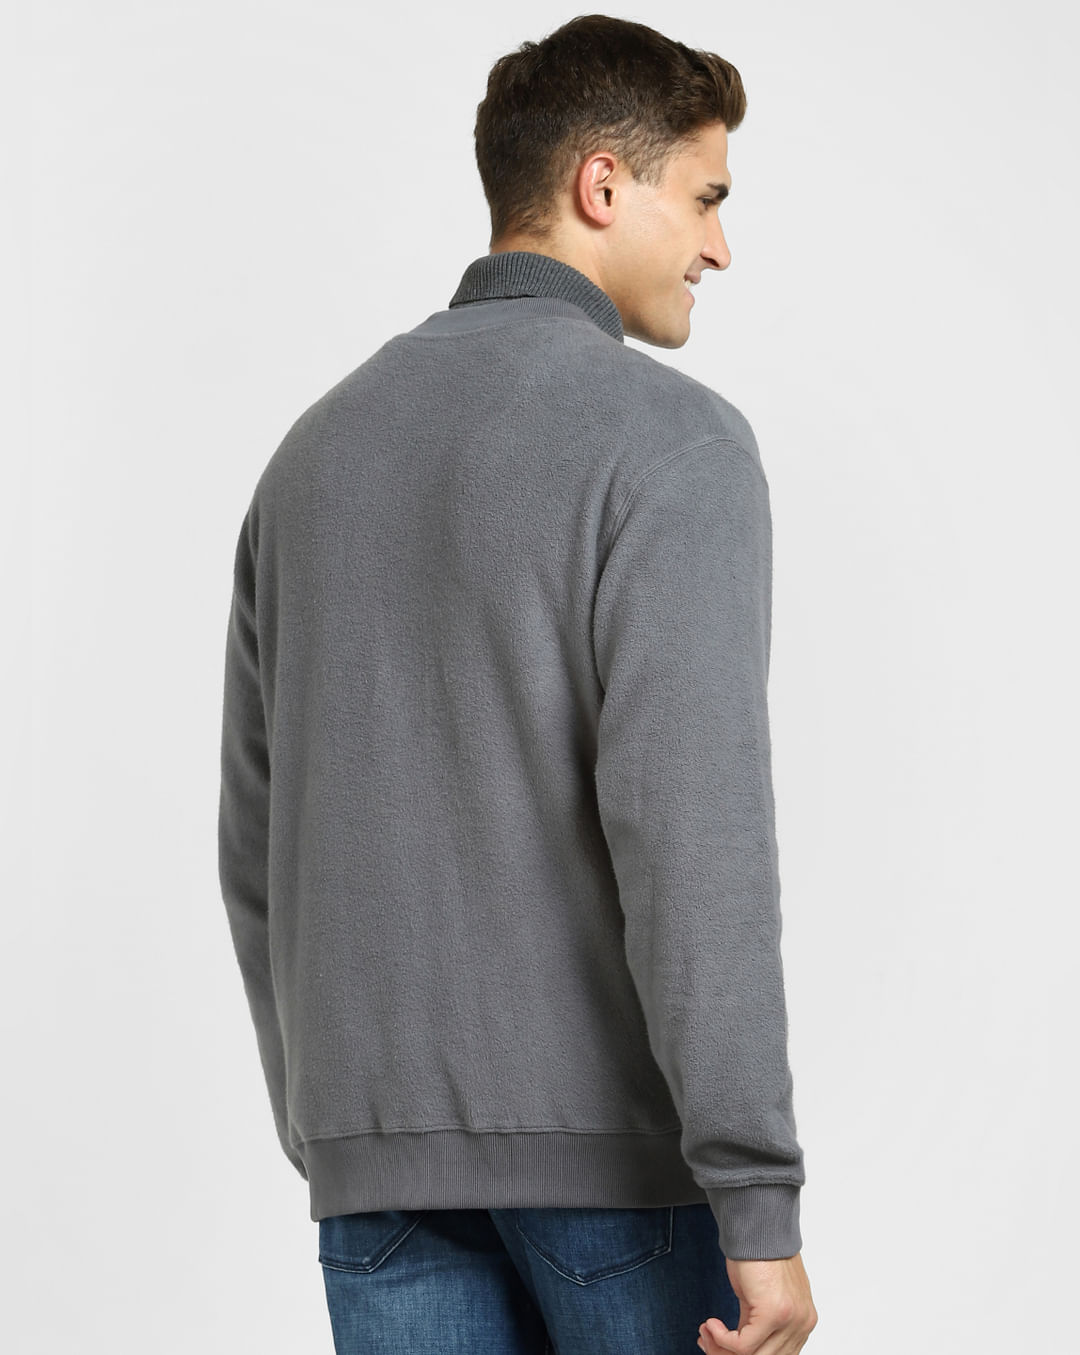 Buy Grey Sweat Jacket Online at SELECTED HOMME |160209002